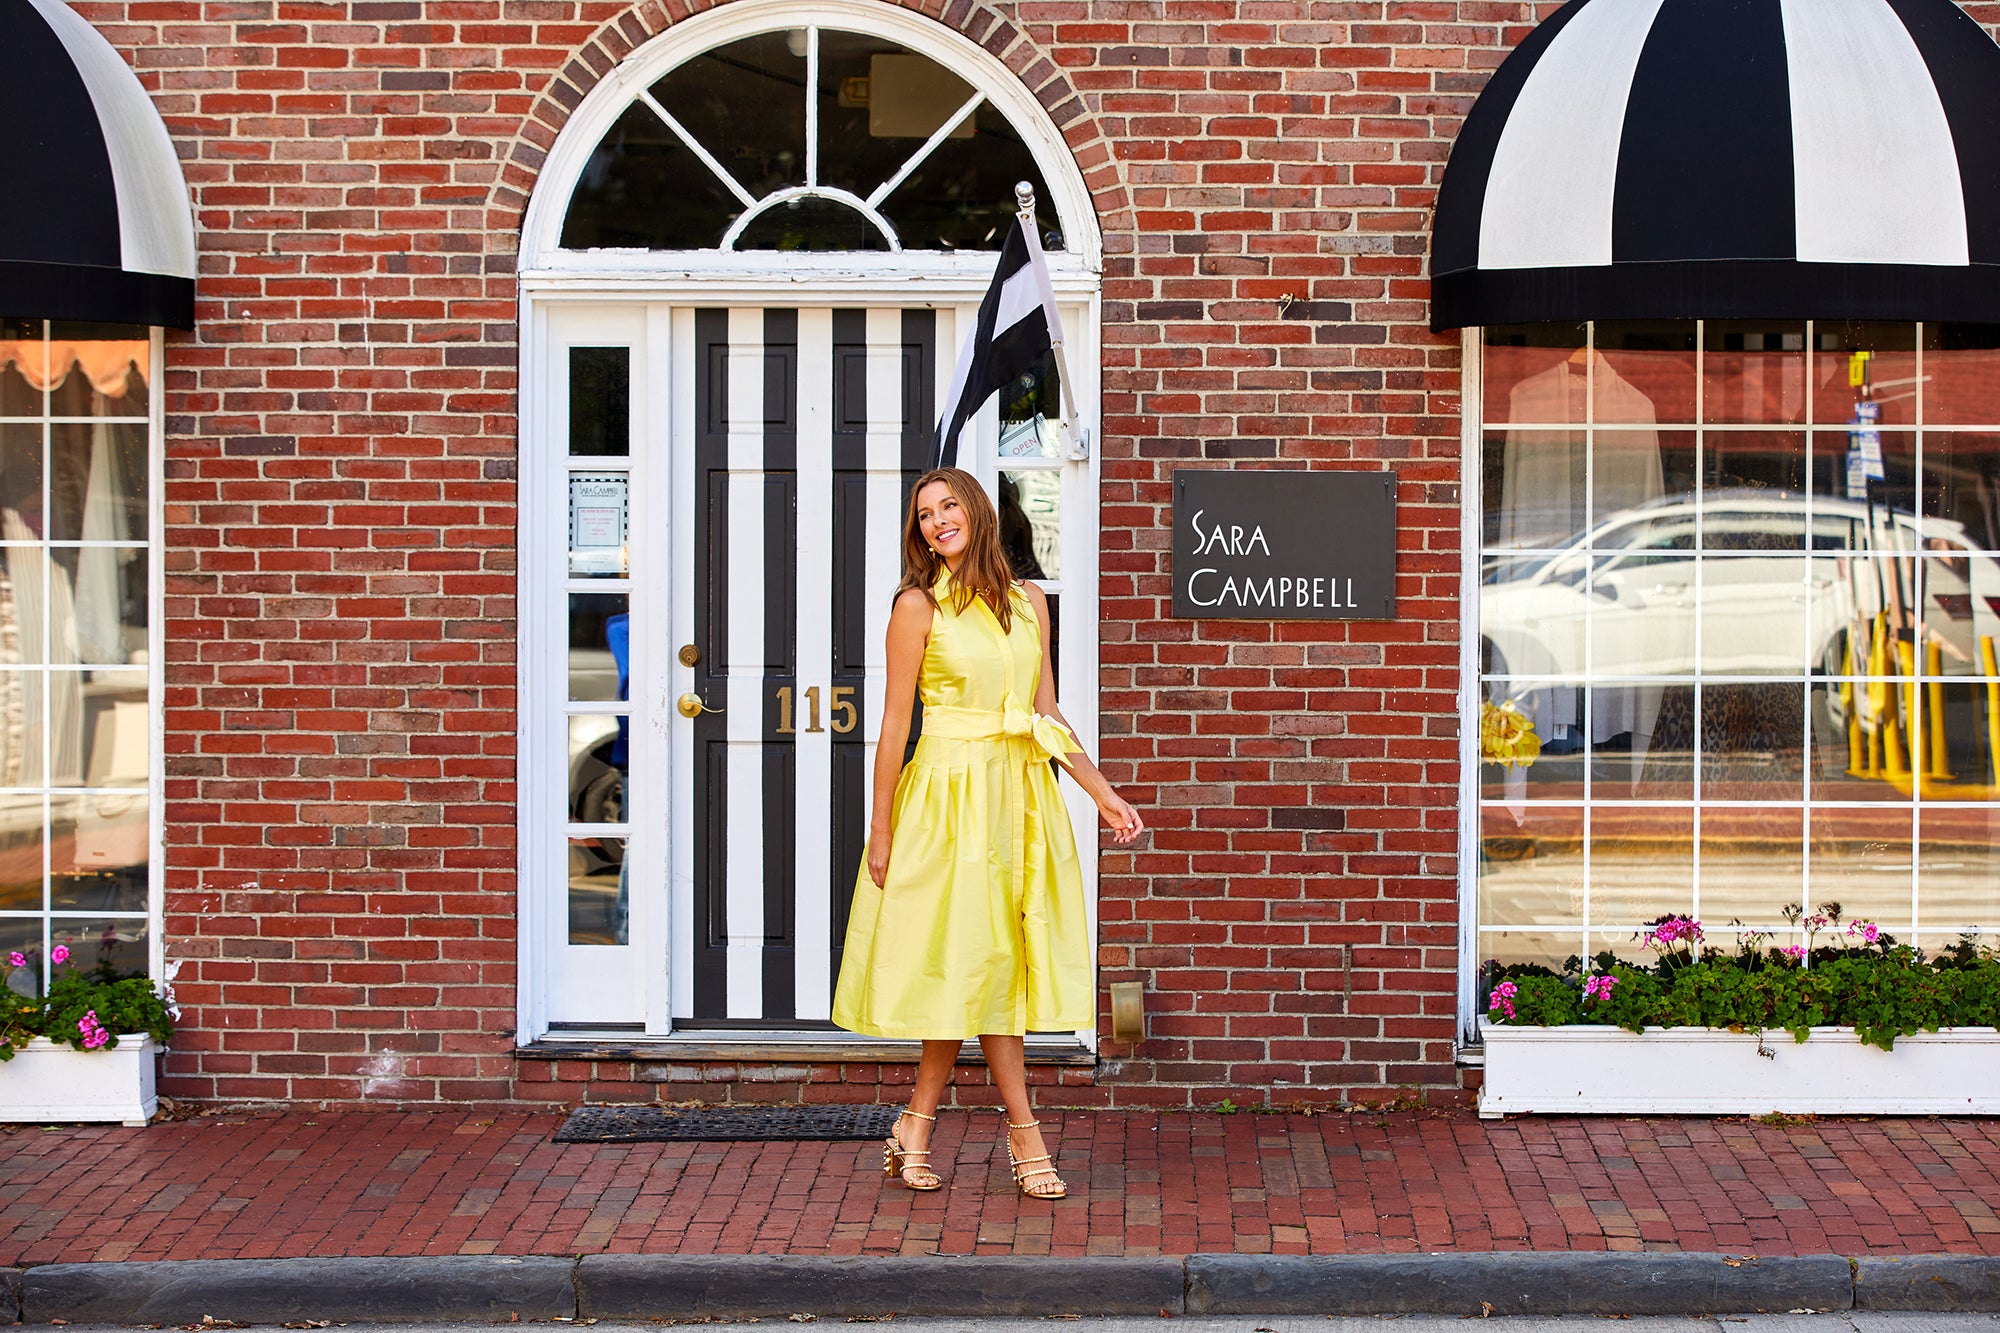 Woman walking in front of a Sara Campbell store